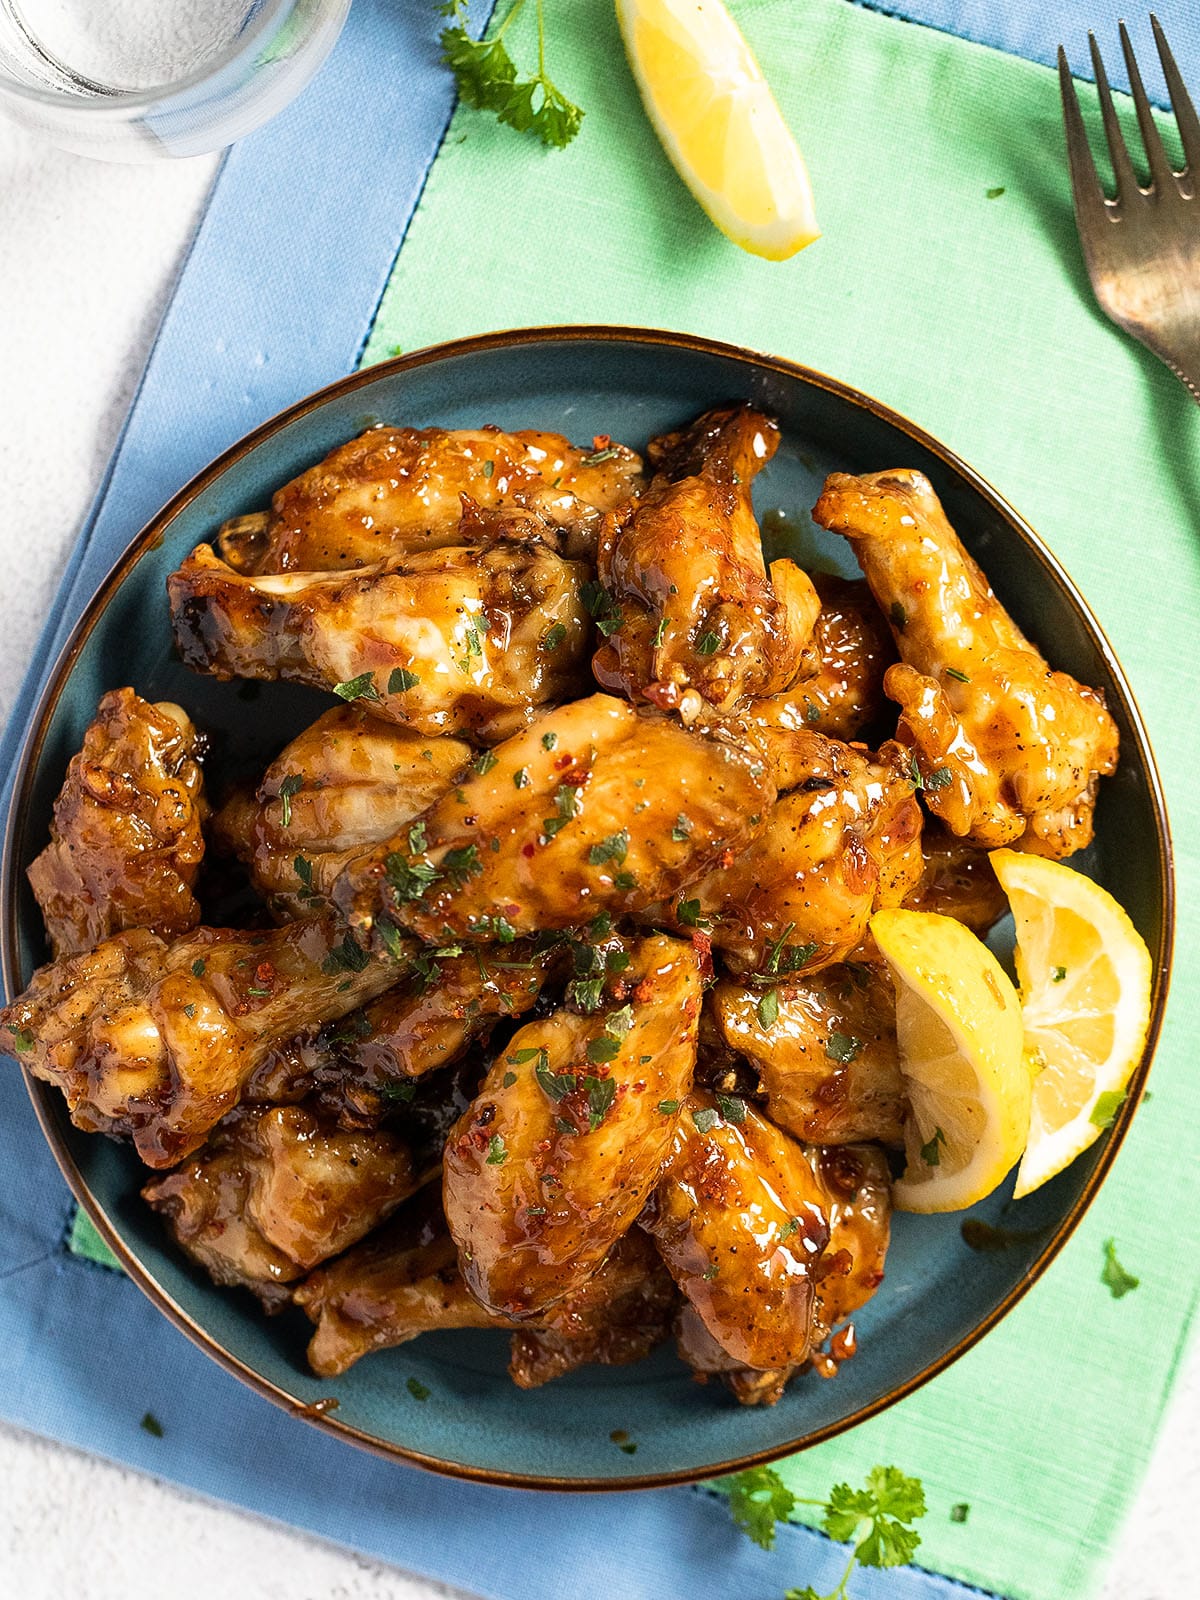 bowl of chicken wings glazed with sauce on a blue green cloth.